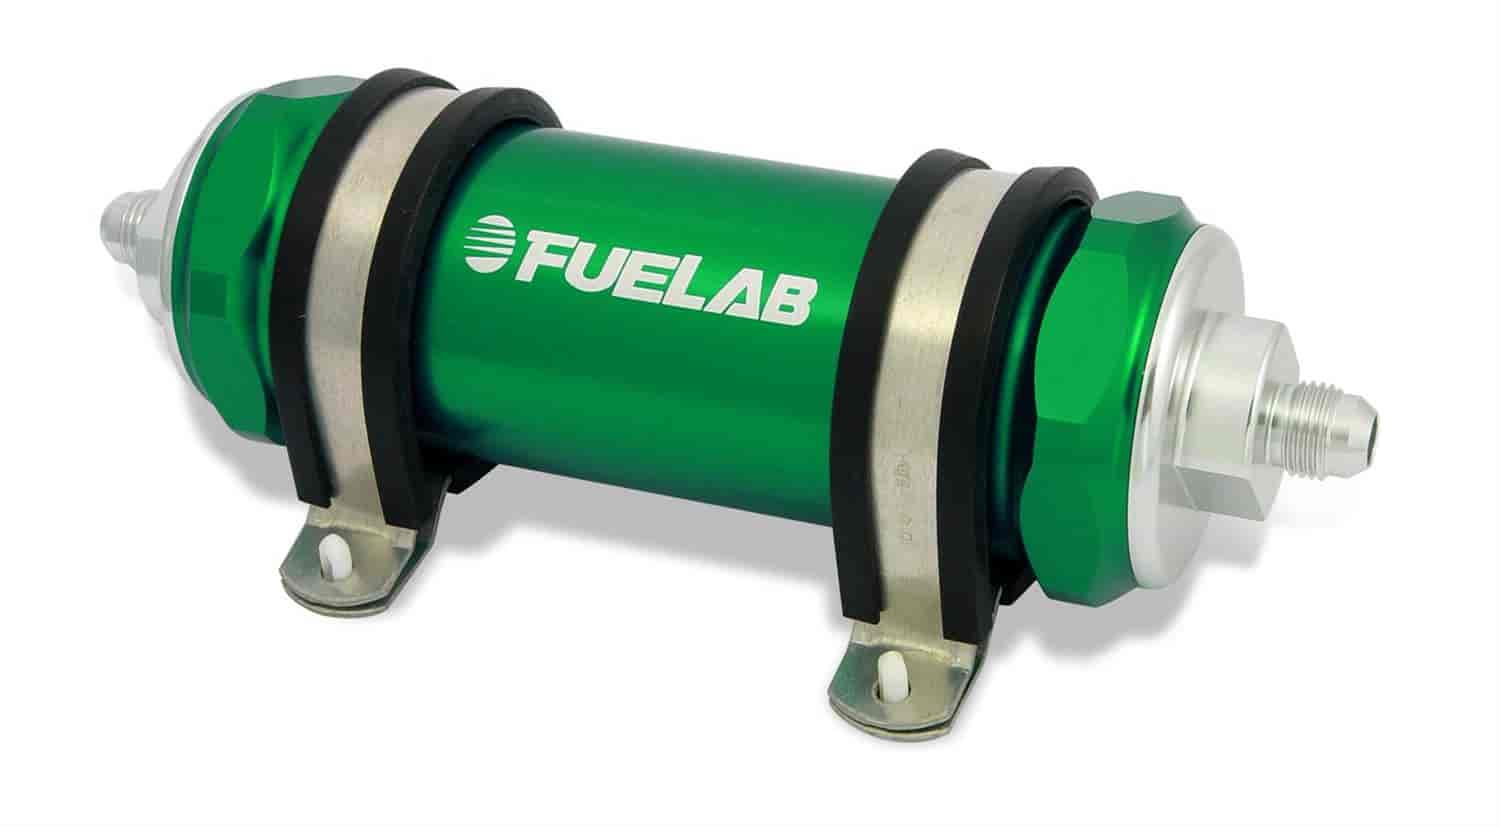 In-Line Fuel Filter Long Length -10AN Inlet/-8AN Outlet 75 micron stainless steel element